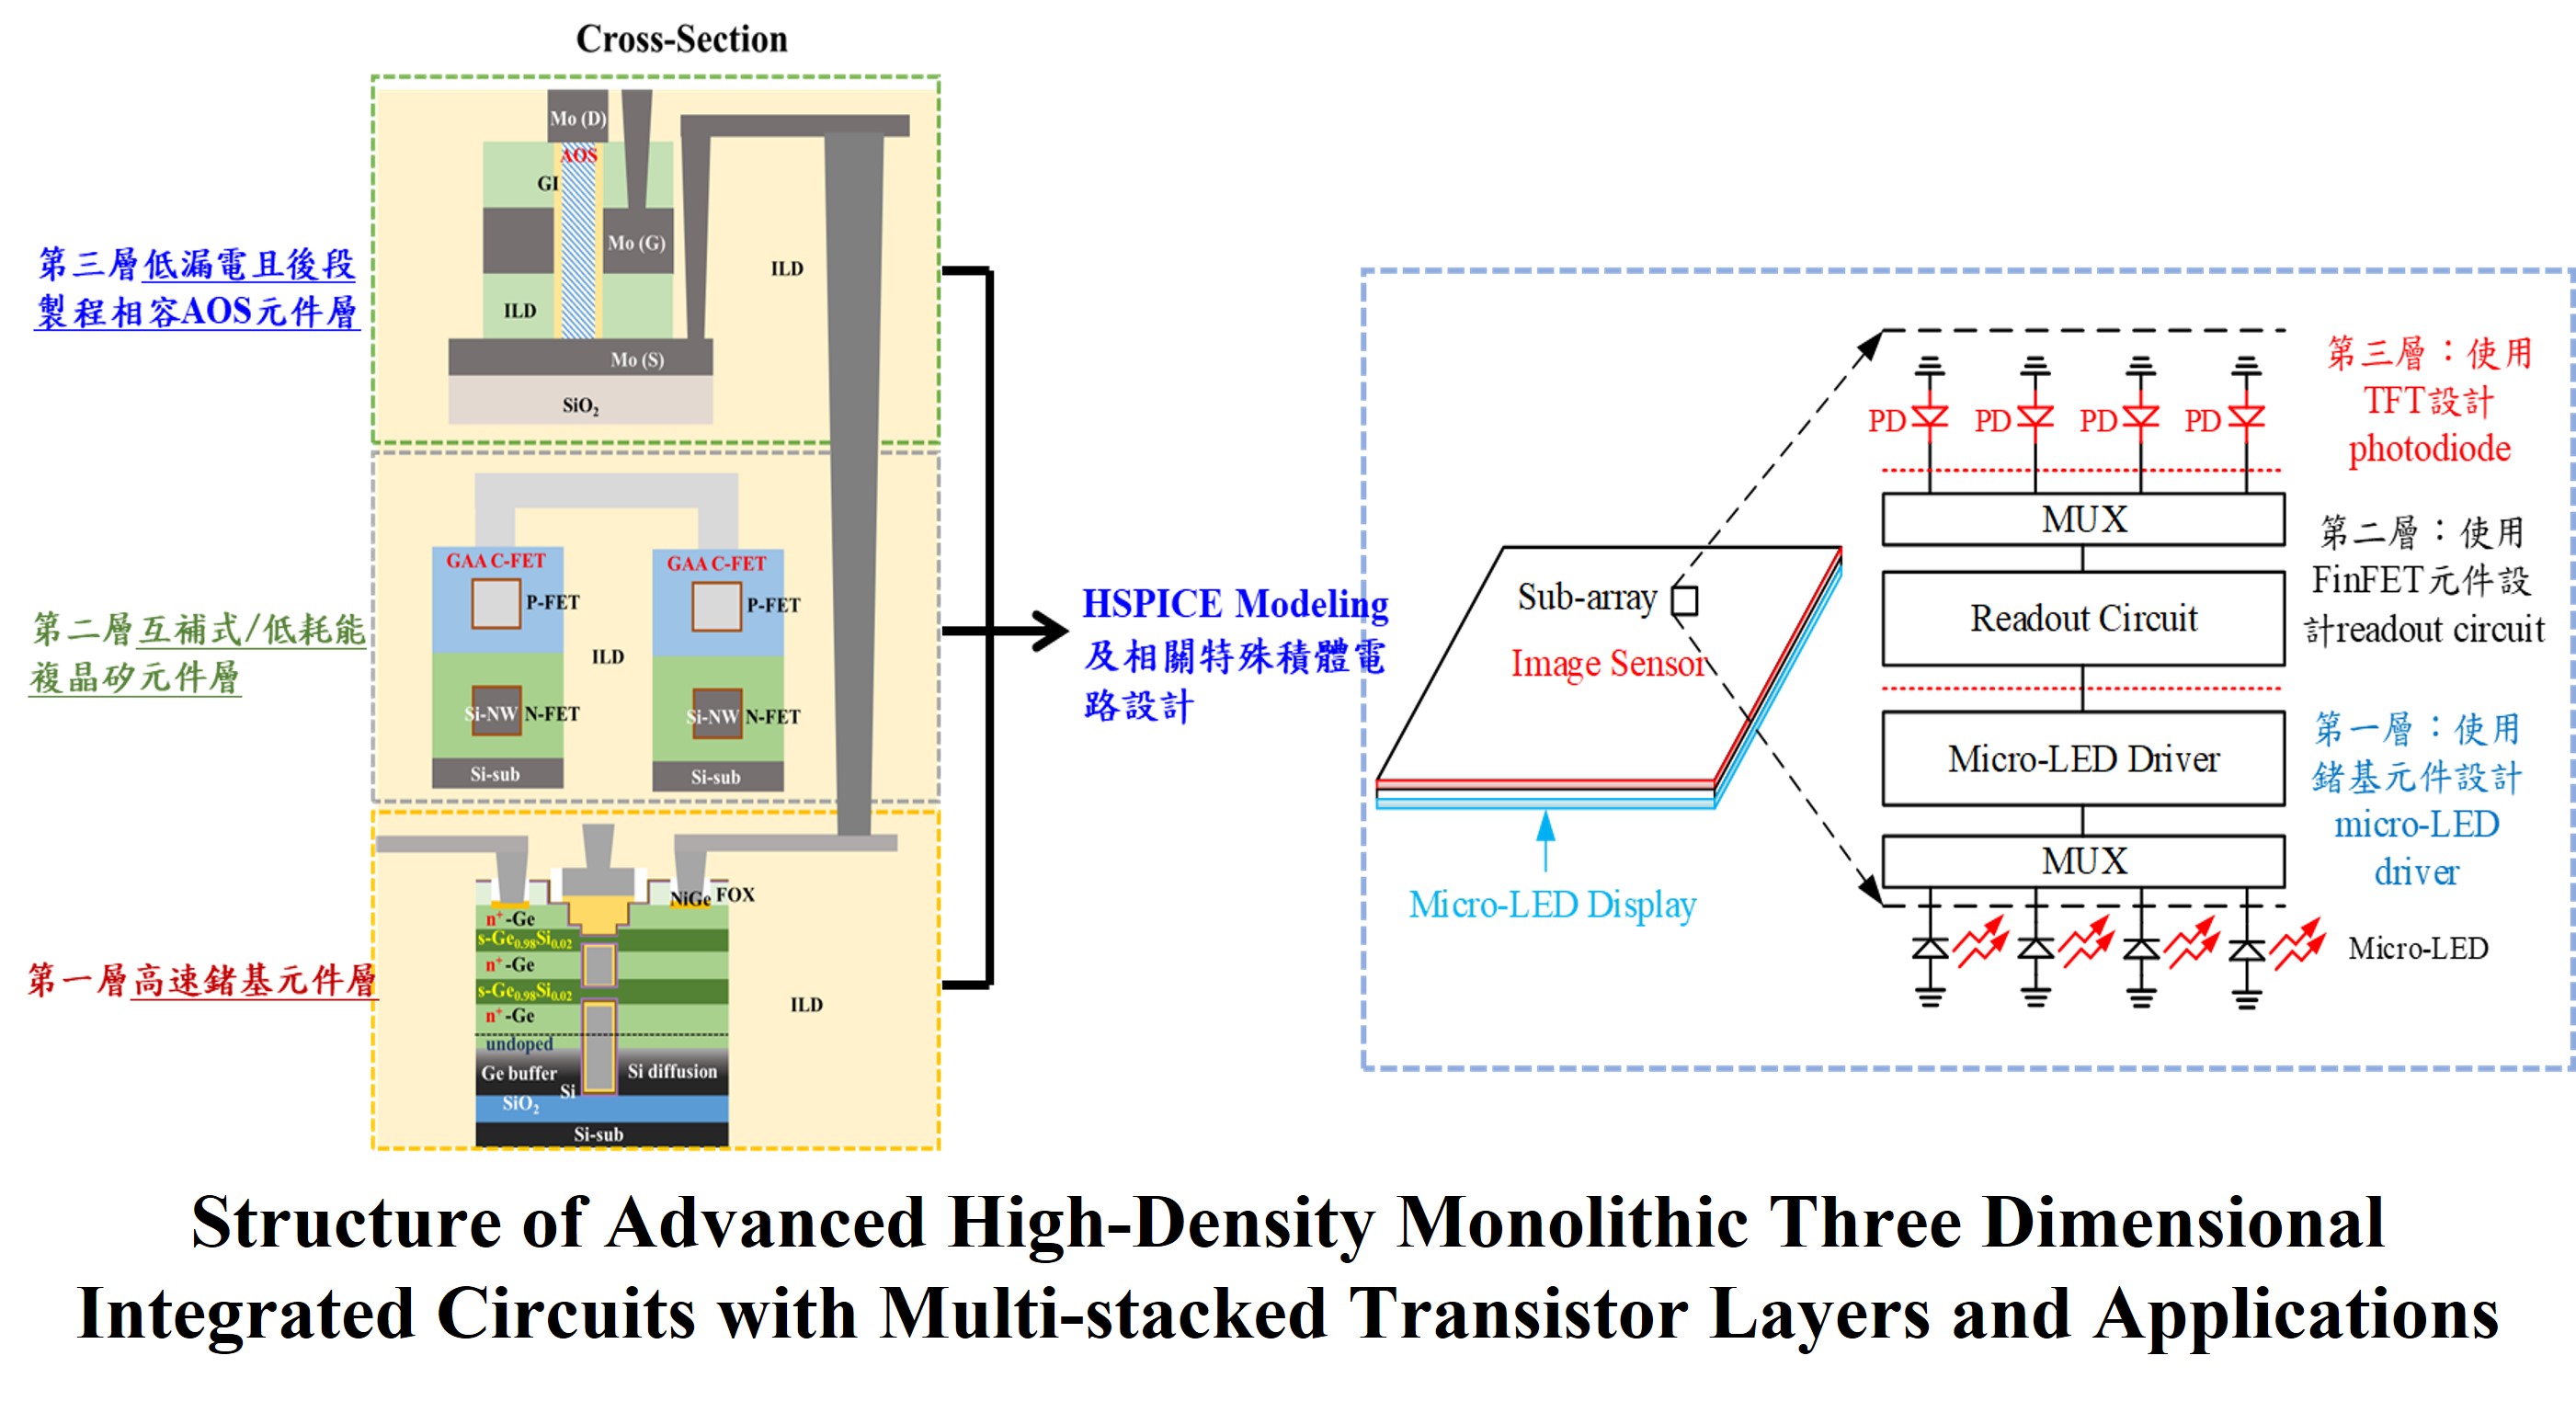 Development for Advanced High-Density Monolithic Three Dimensional Integrated Circuits with Multi-stacked Transistor Layers